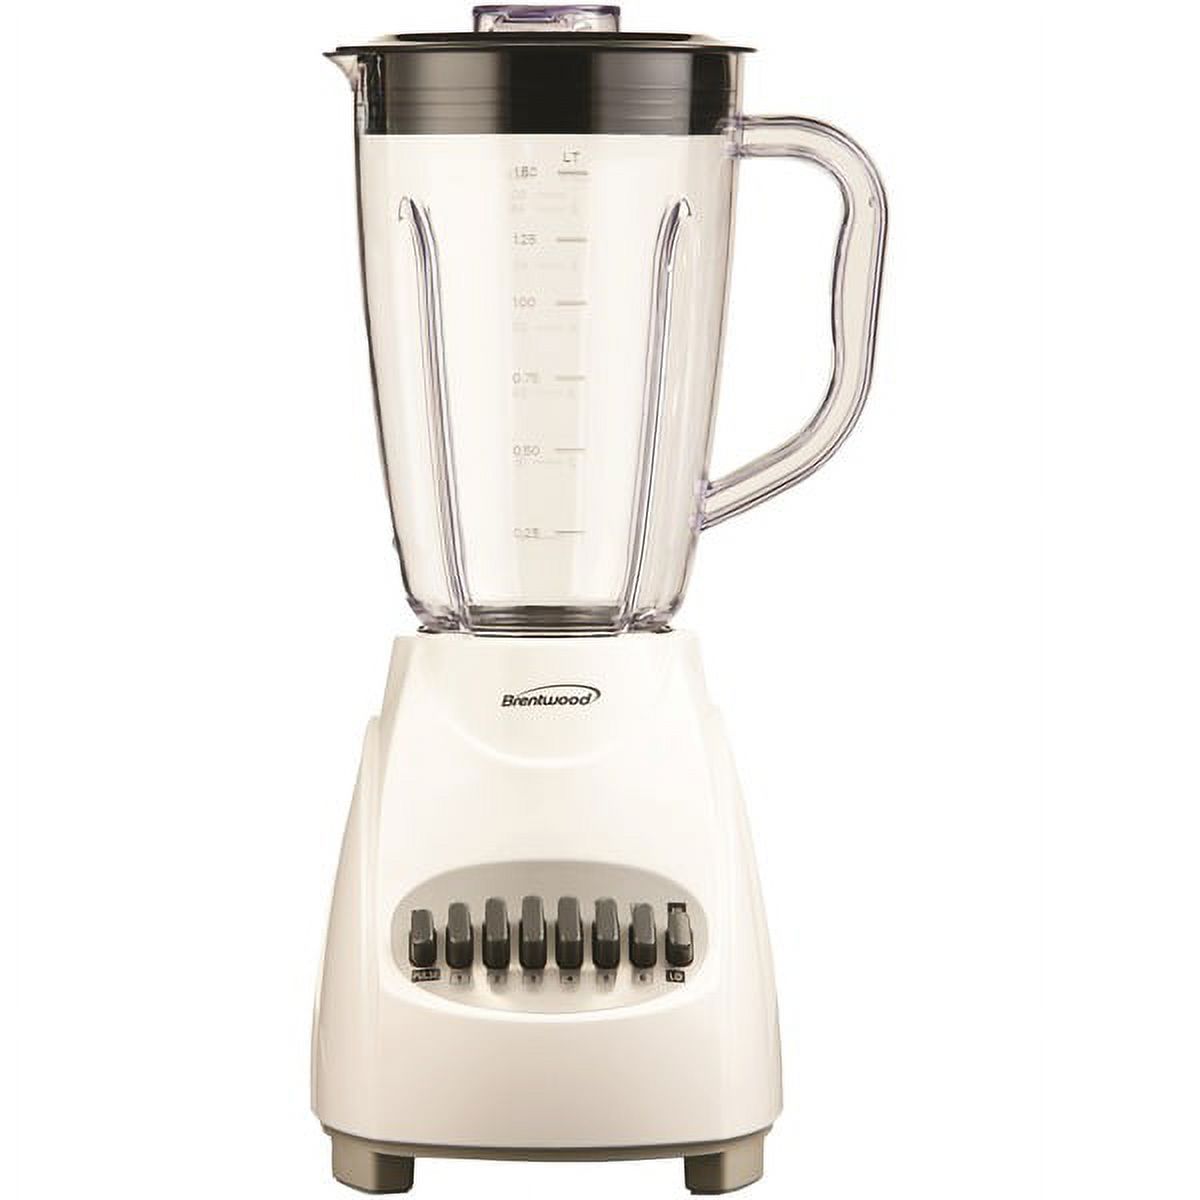 Brentwood® Appliances 12-speed Blender With Plastic Jar (white) - image 1 of 1